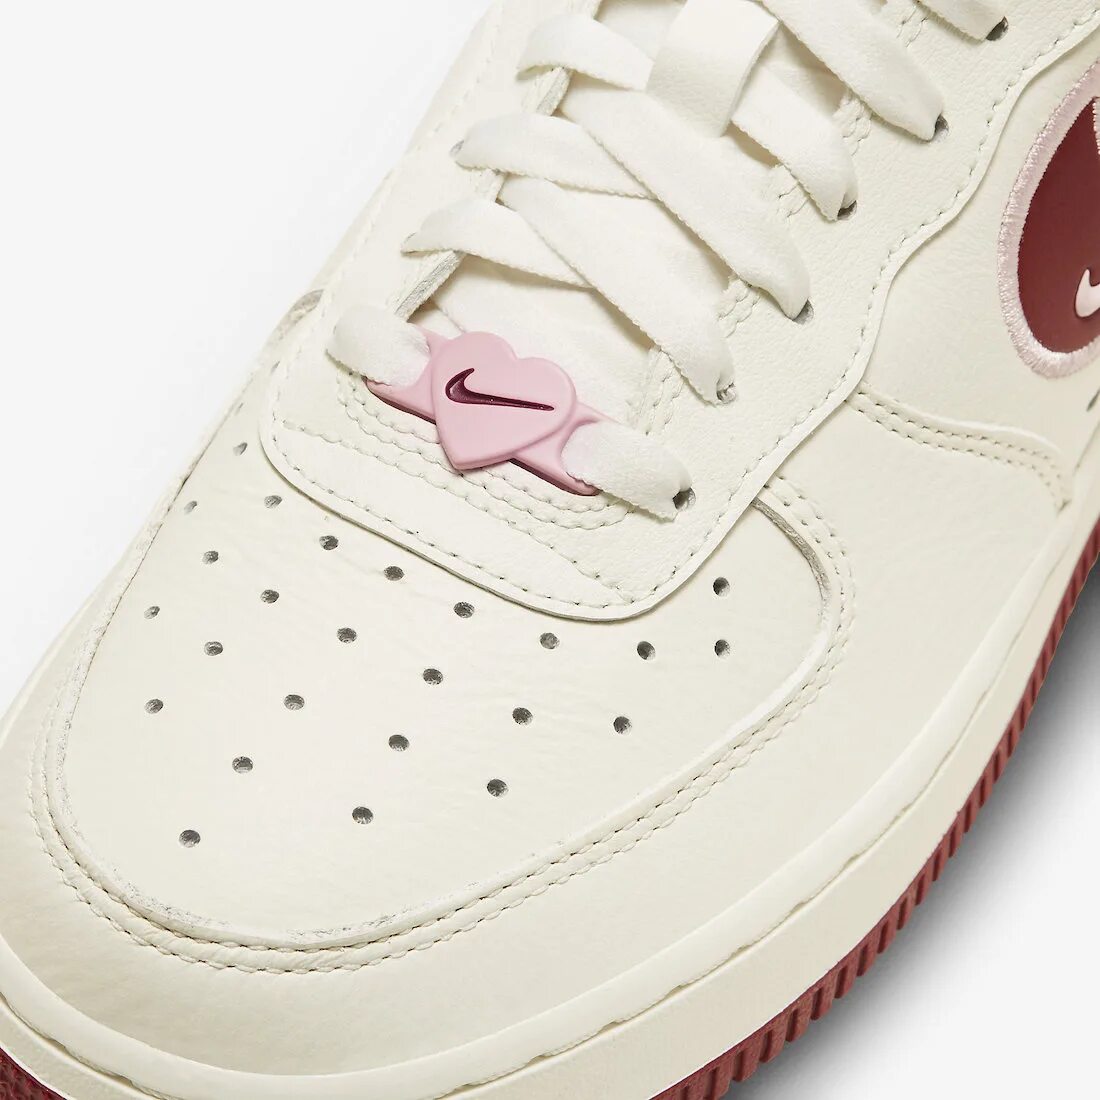 Nike Air Force 1 Valentine's Day 2023. Nike Air Force 1 Low “Valentine’s Day” 2023. Nike Air Force Valentines Day 2023. Кроссовки Nike Air Force 1 Low Valentine's Day.